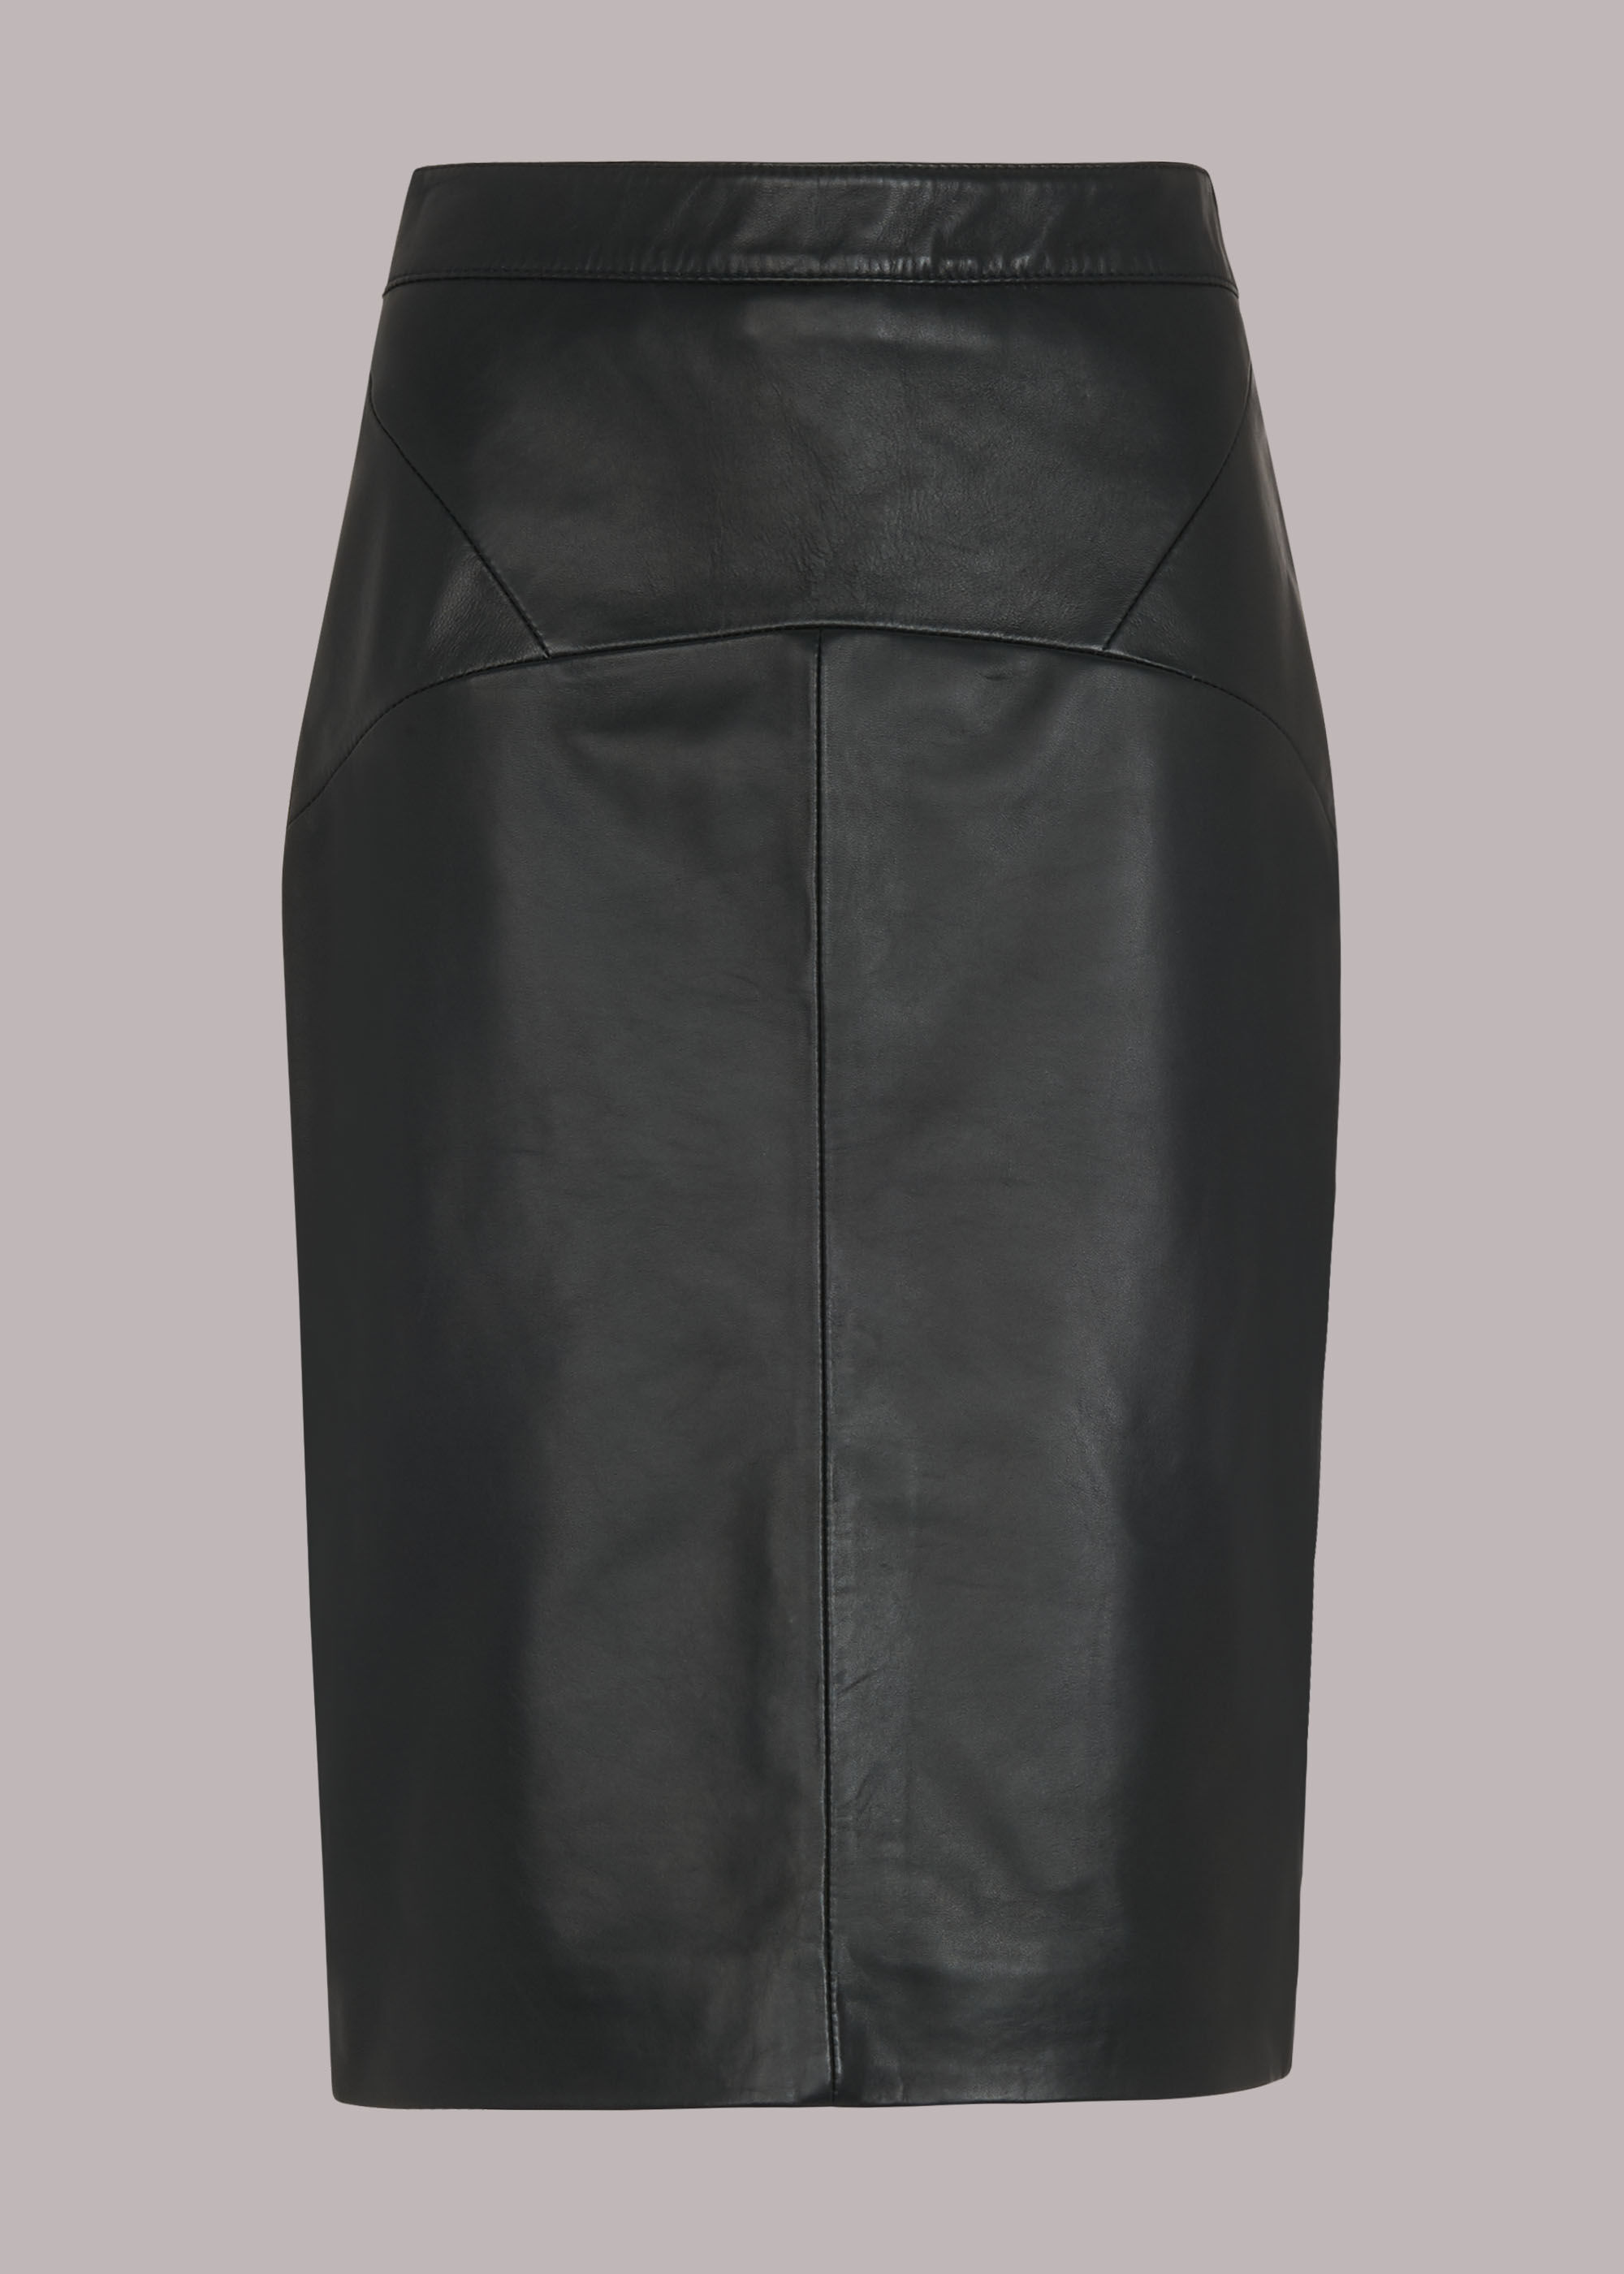 brown leather pencil skirt uk